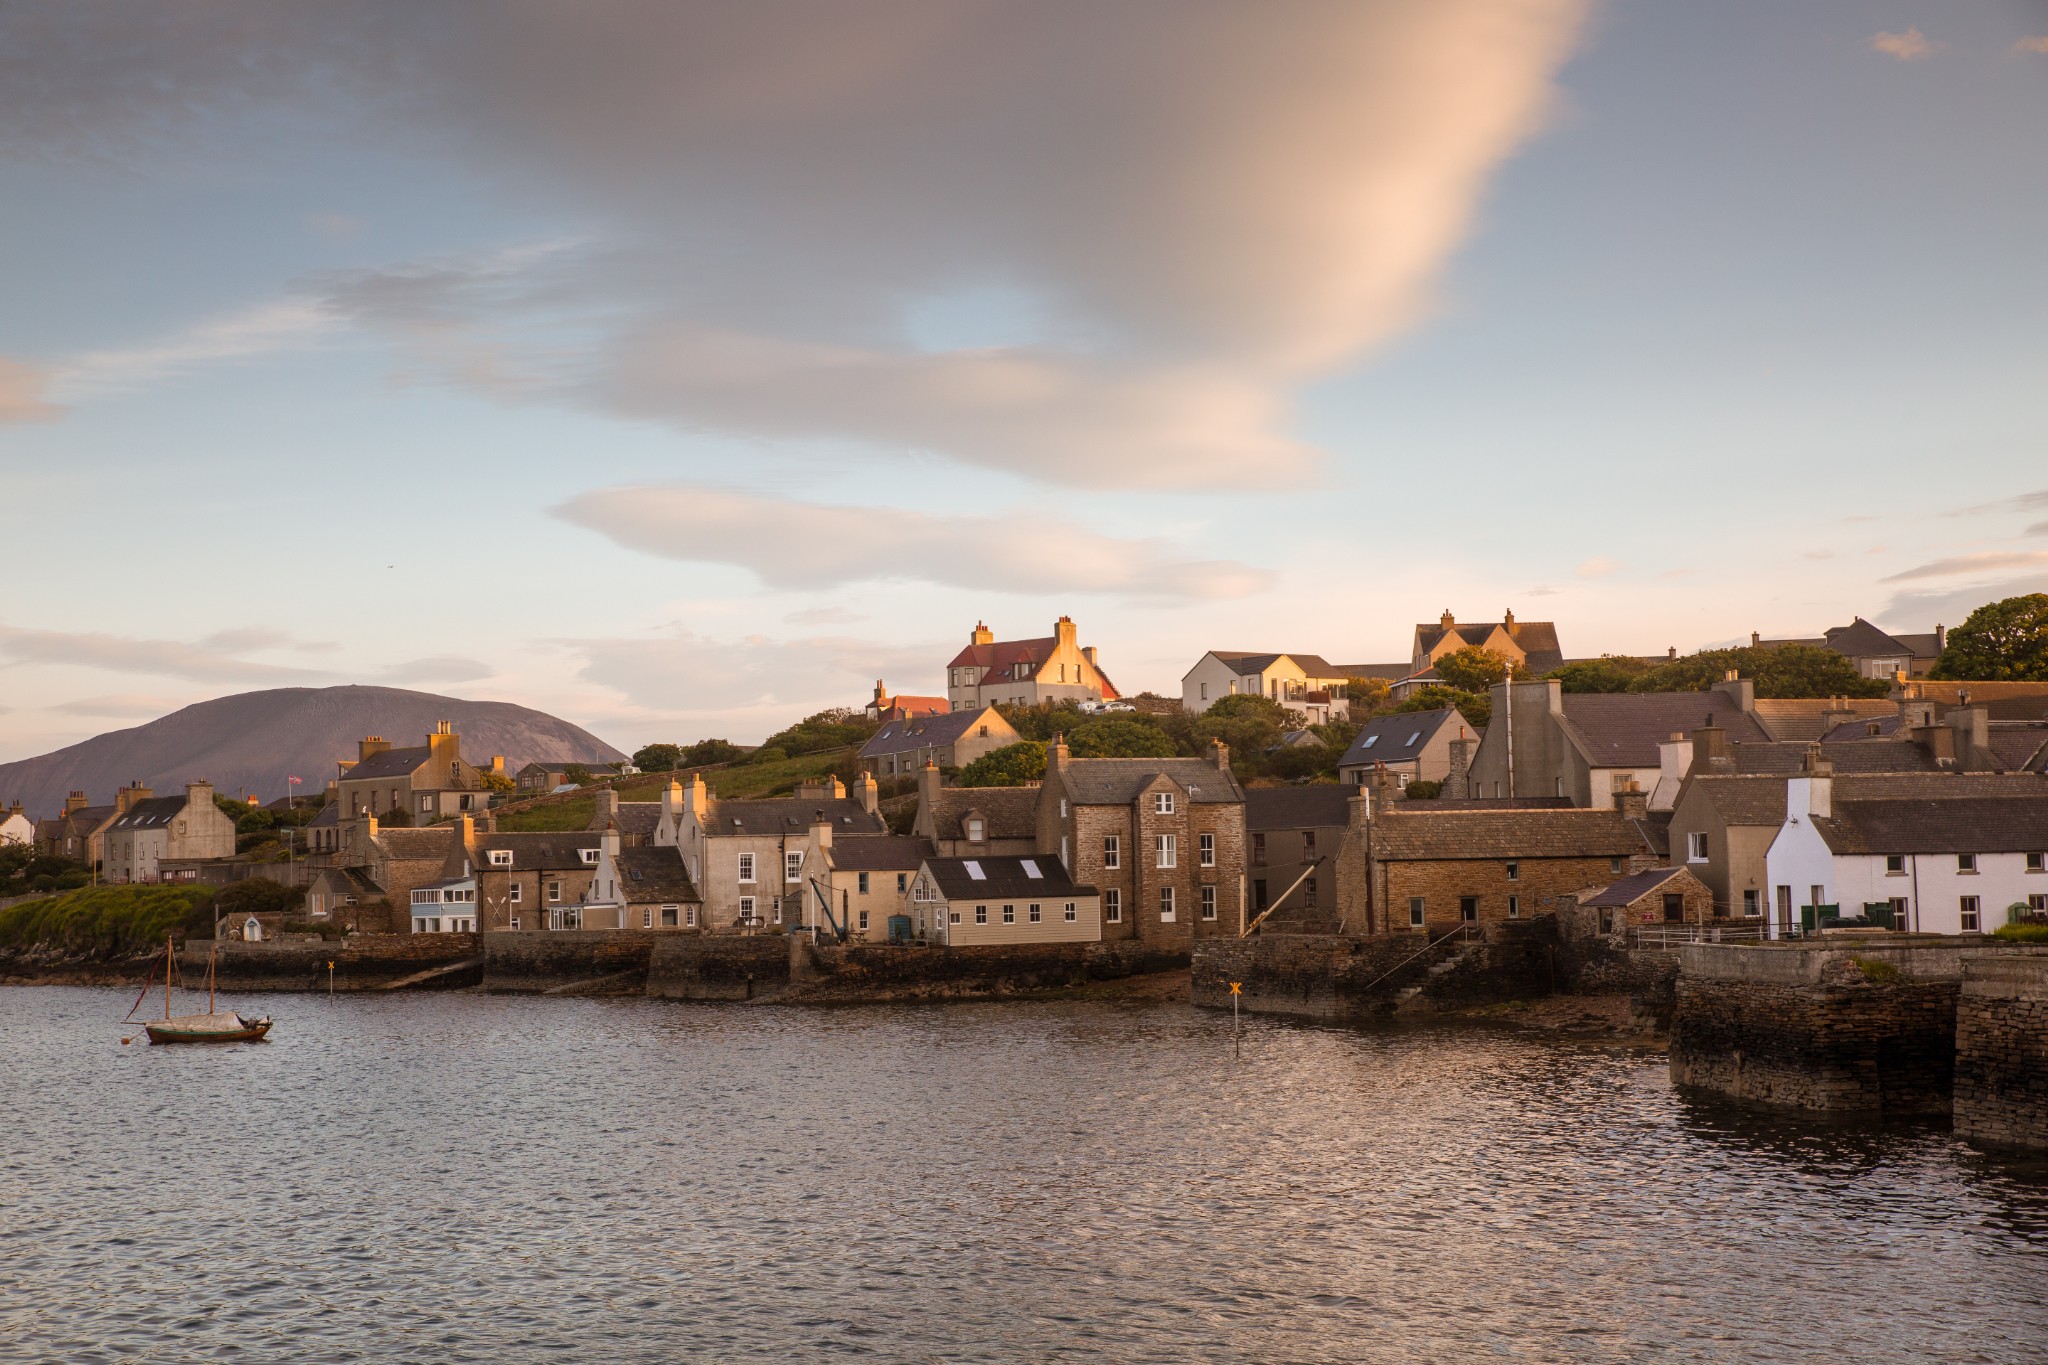 View along Stromness harbourfront